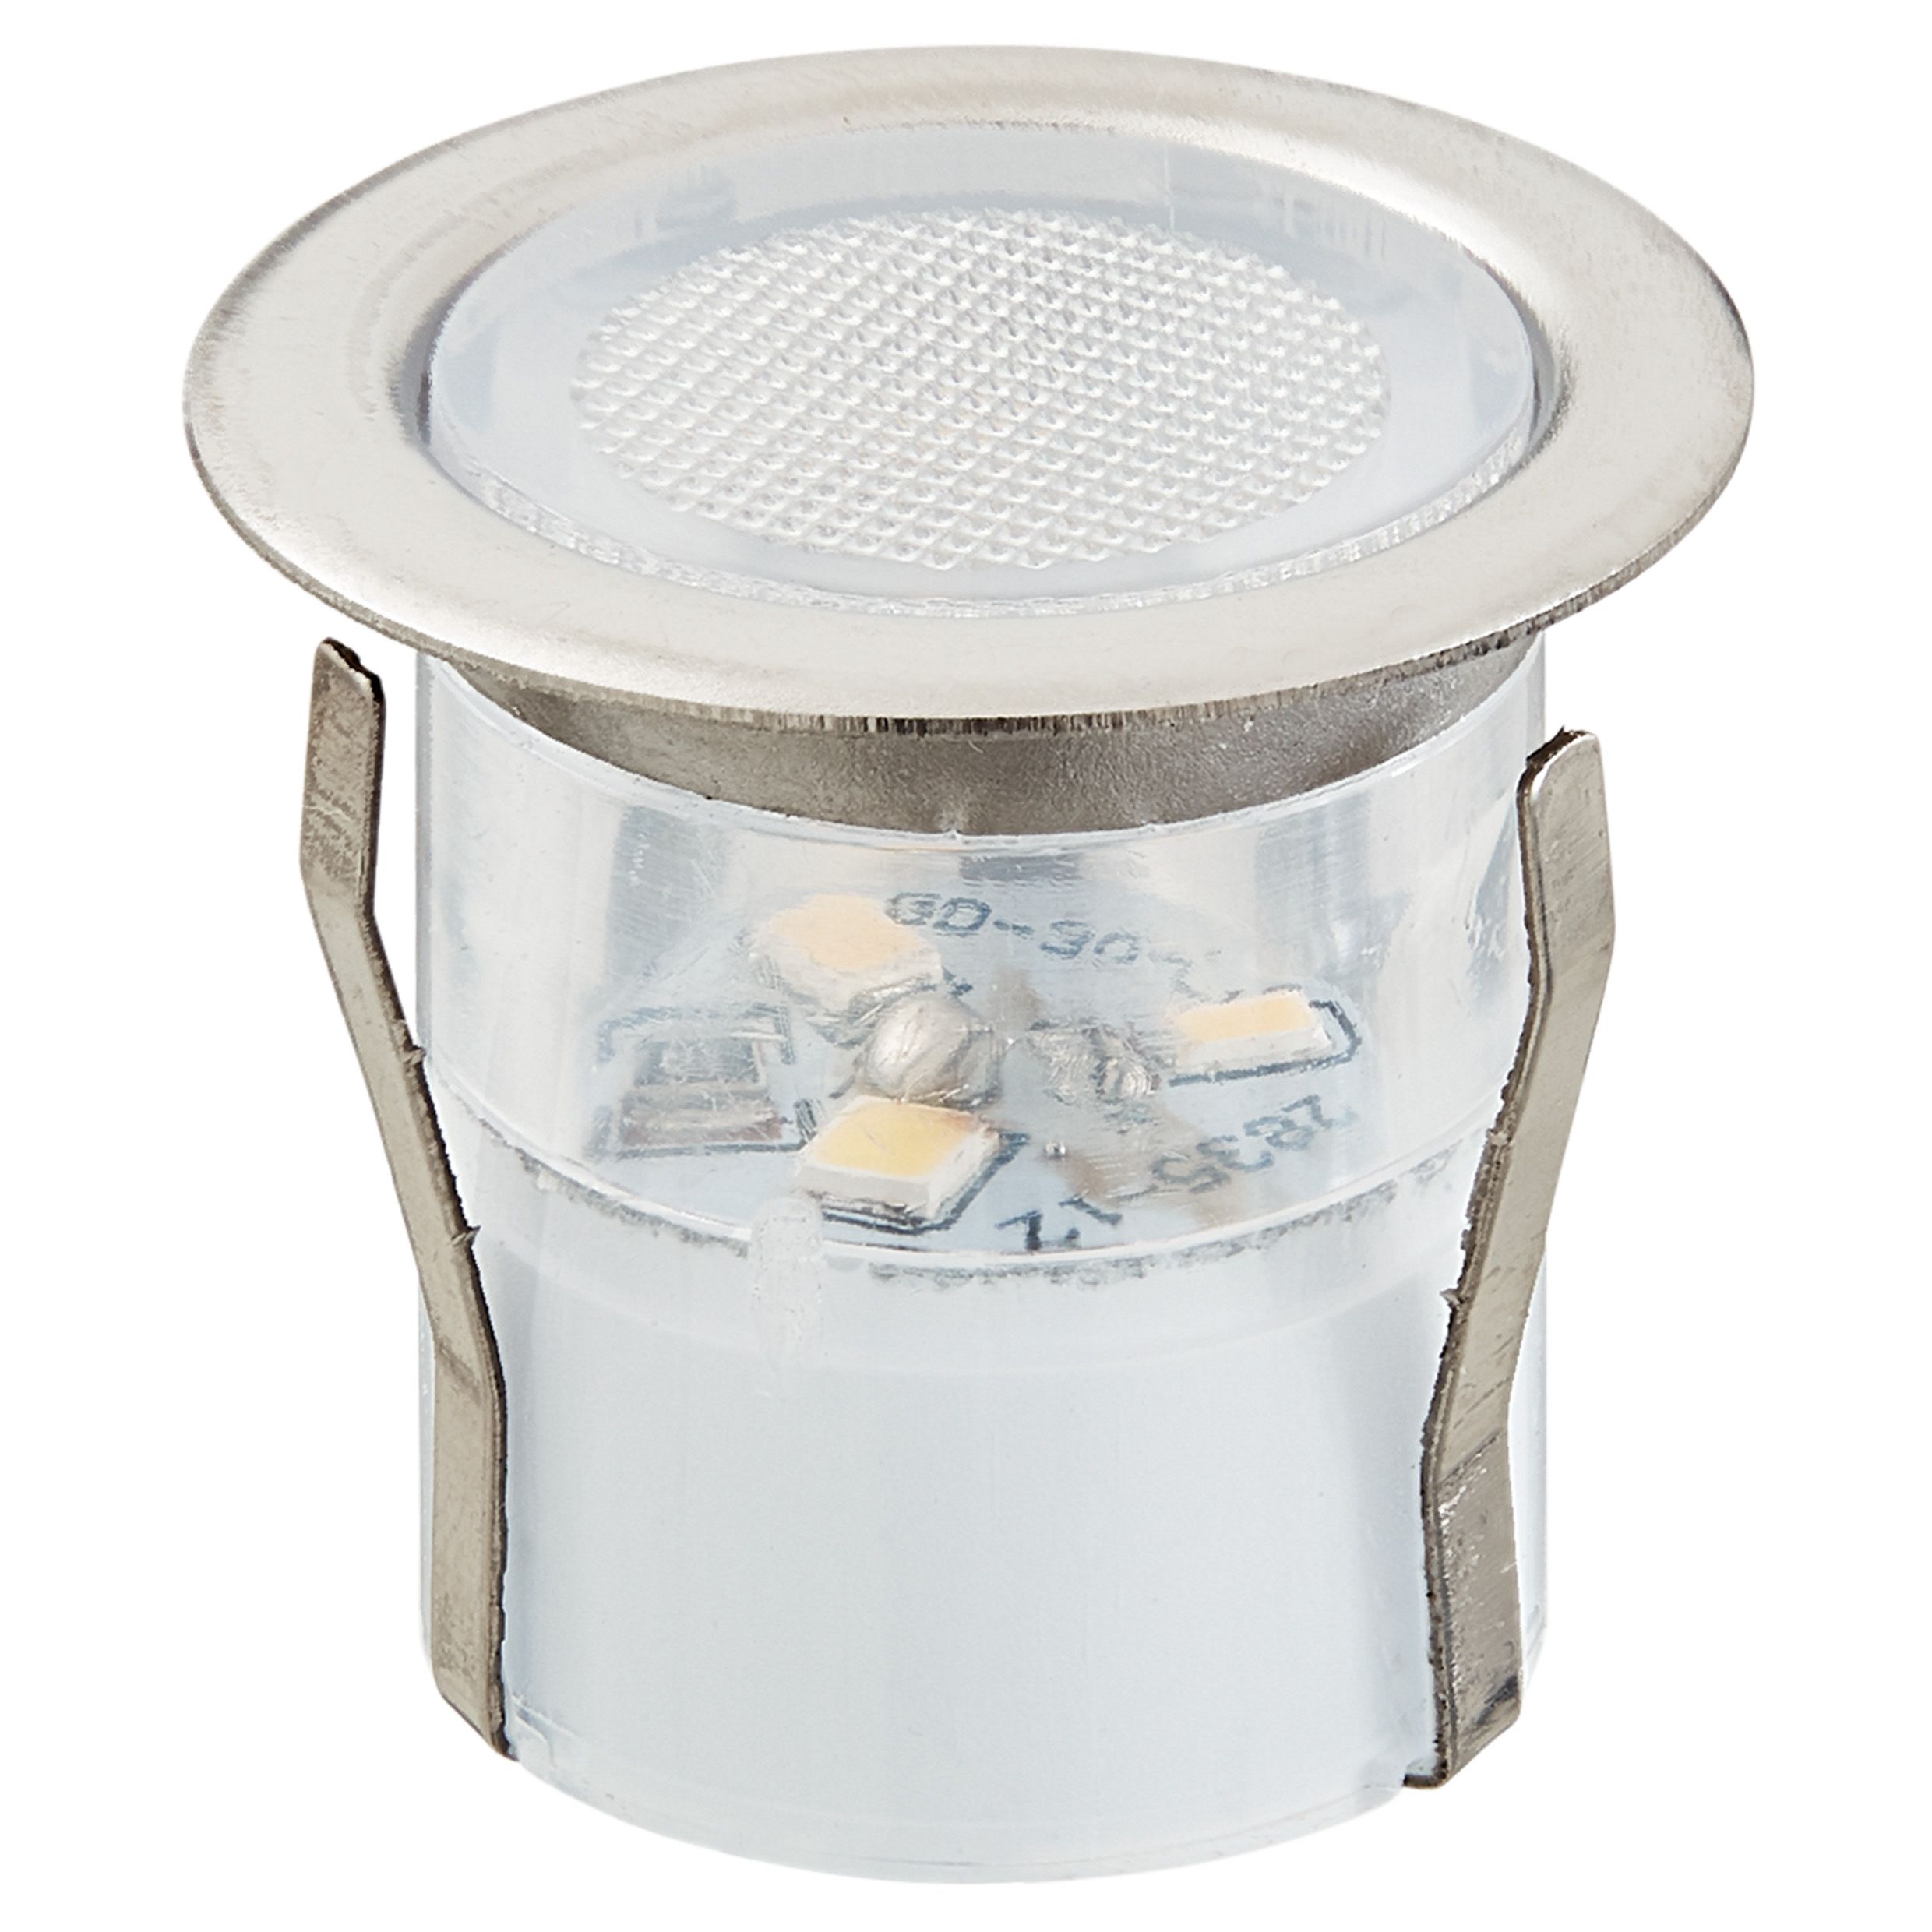 GoodHome Stainless steel Mains-powered Neutral white LED Round Deck light, Pack of 10